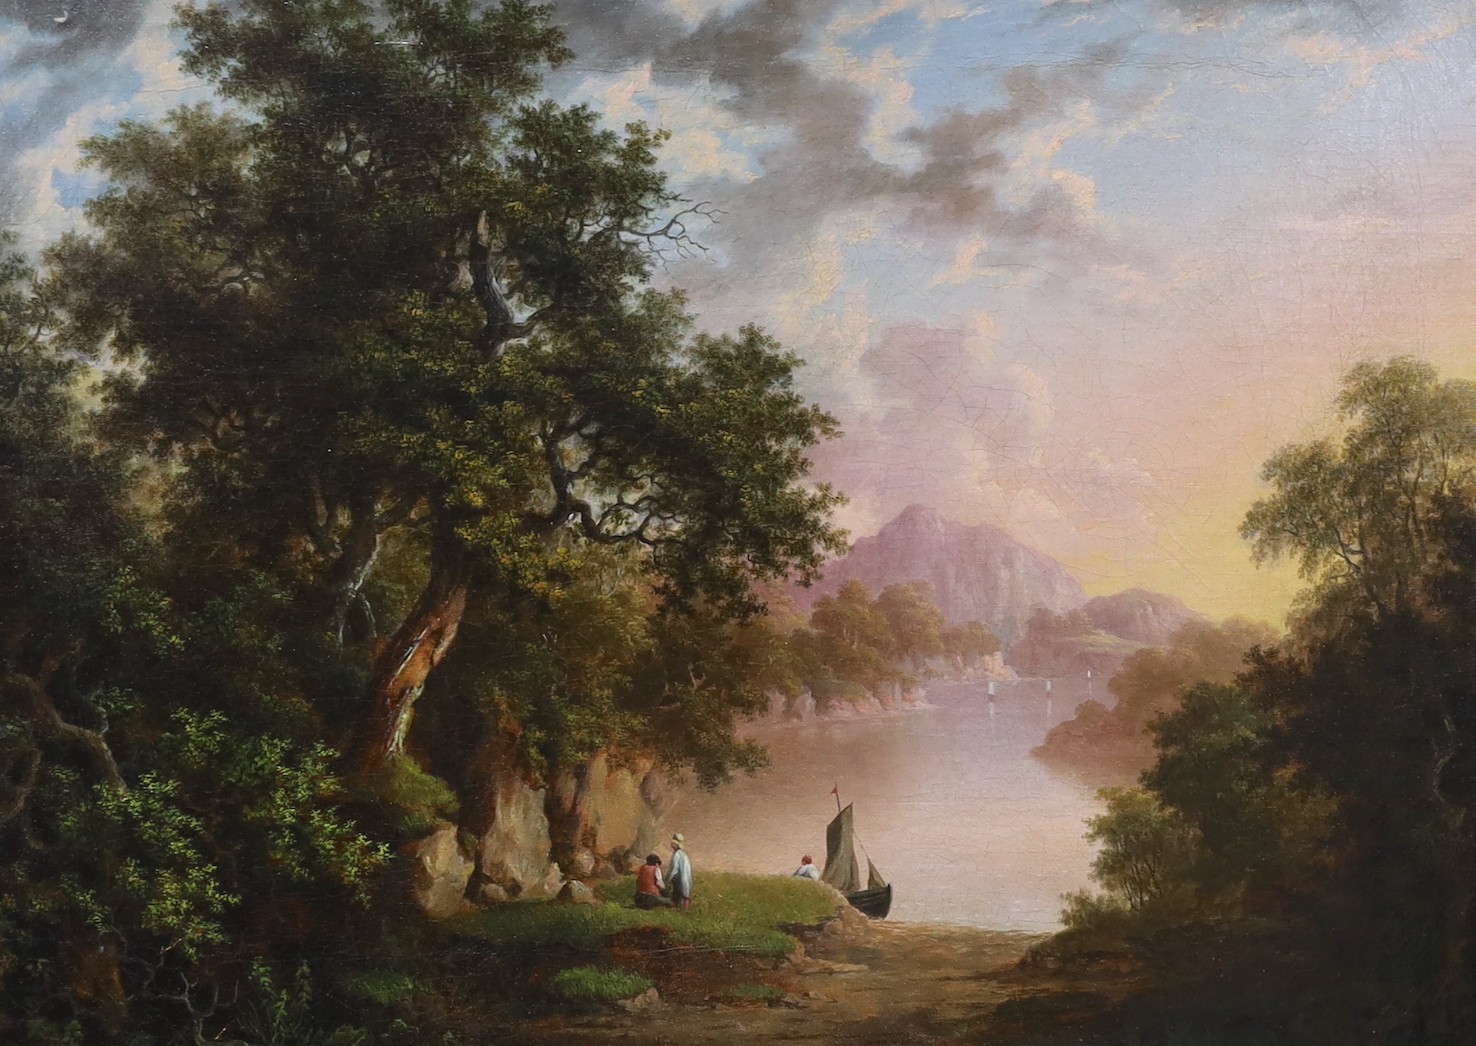 19th century English School, oil on canvas, Wooded river landscape, 37 x 52cm